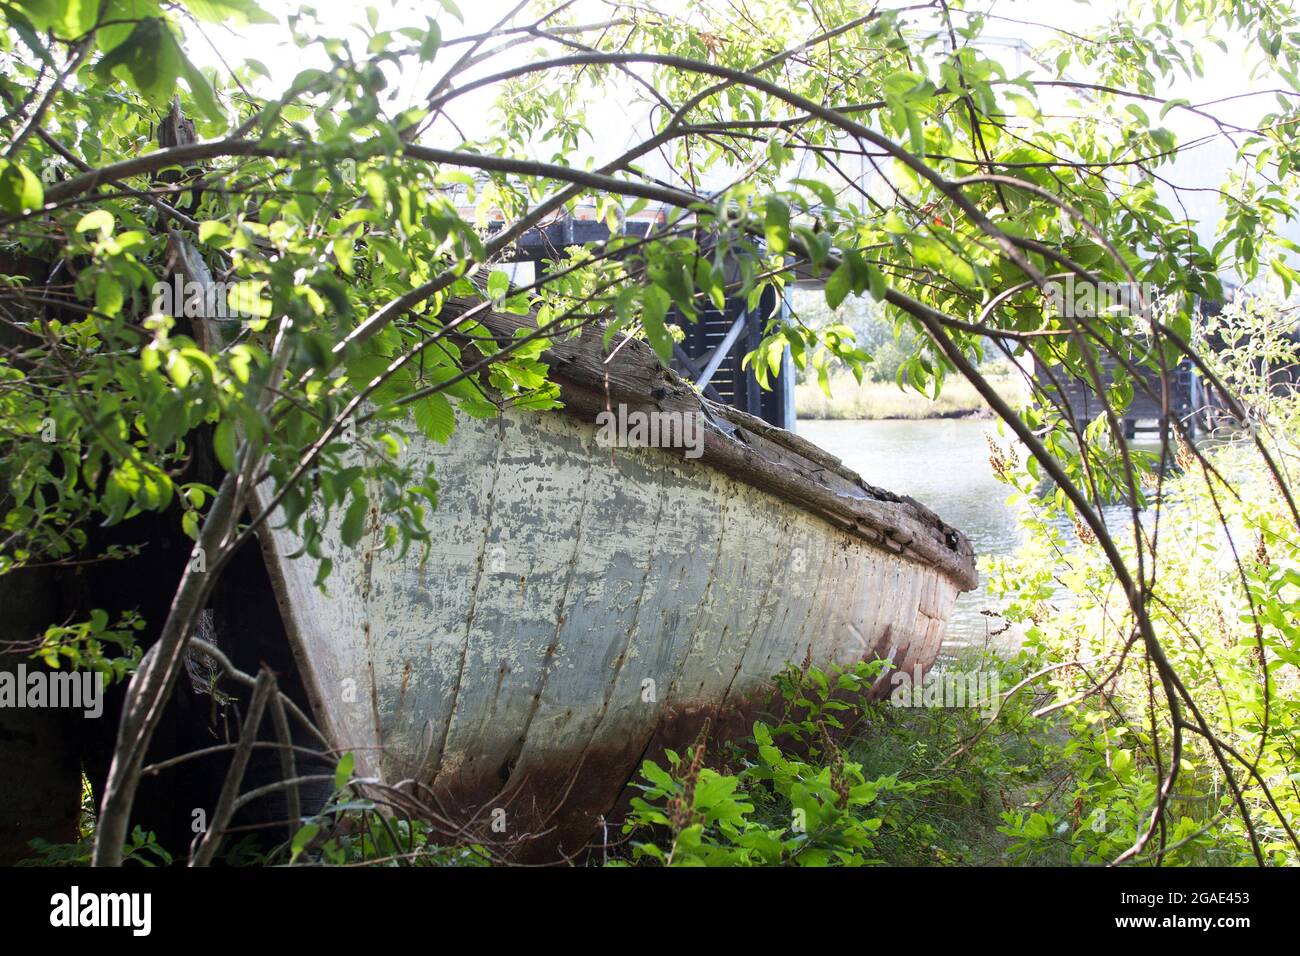 The hull of a discarded rowboat is overgrown by bushes along the shore's edge and falling into ruin. Stock Photo